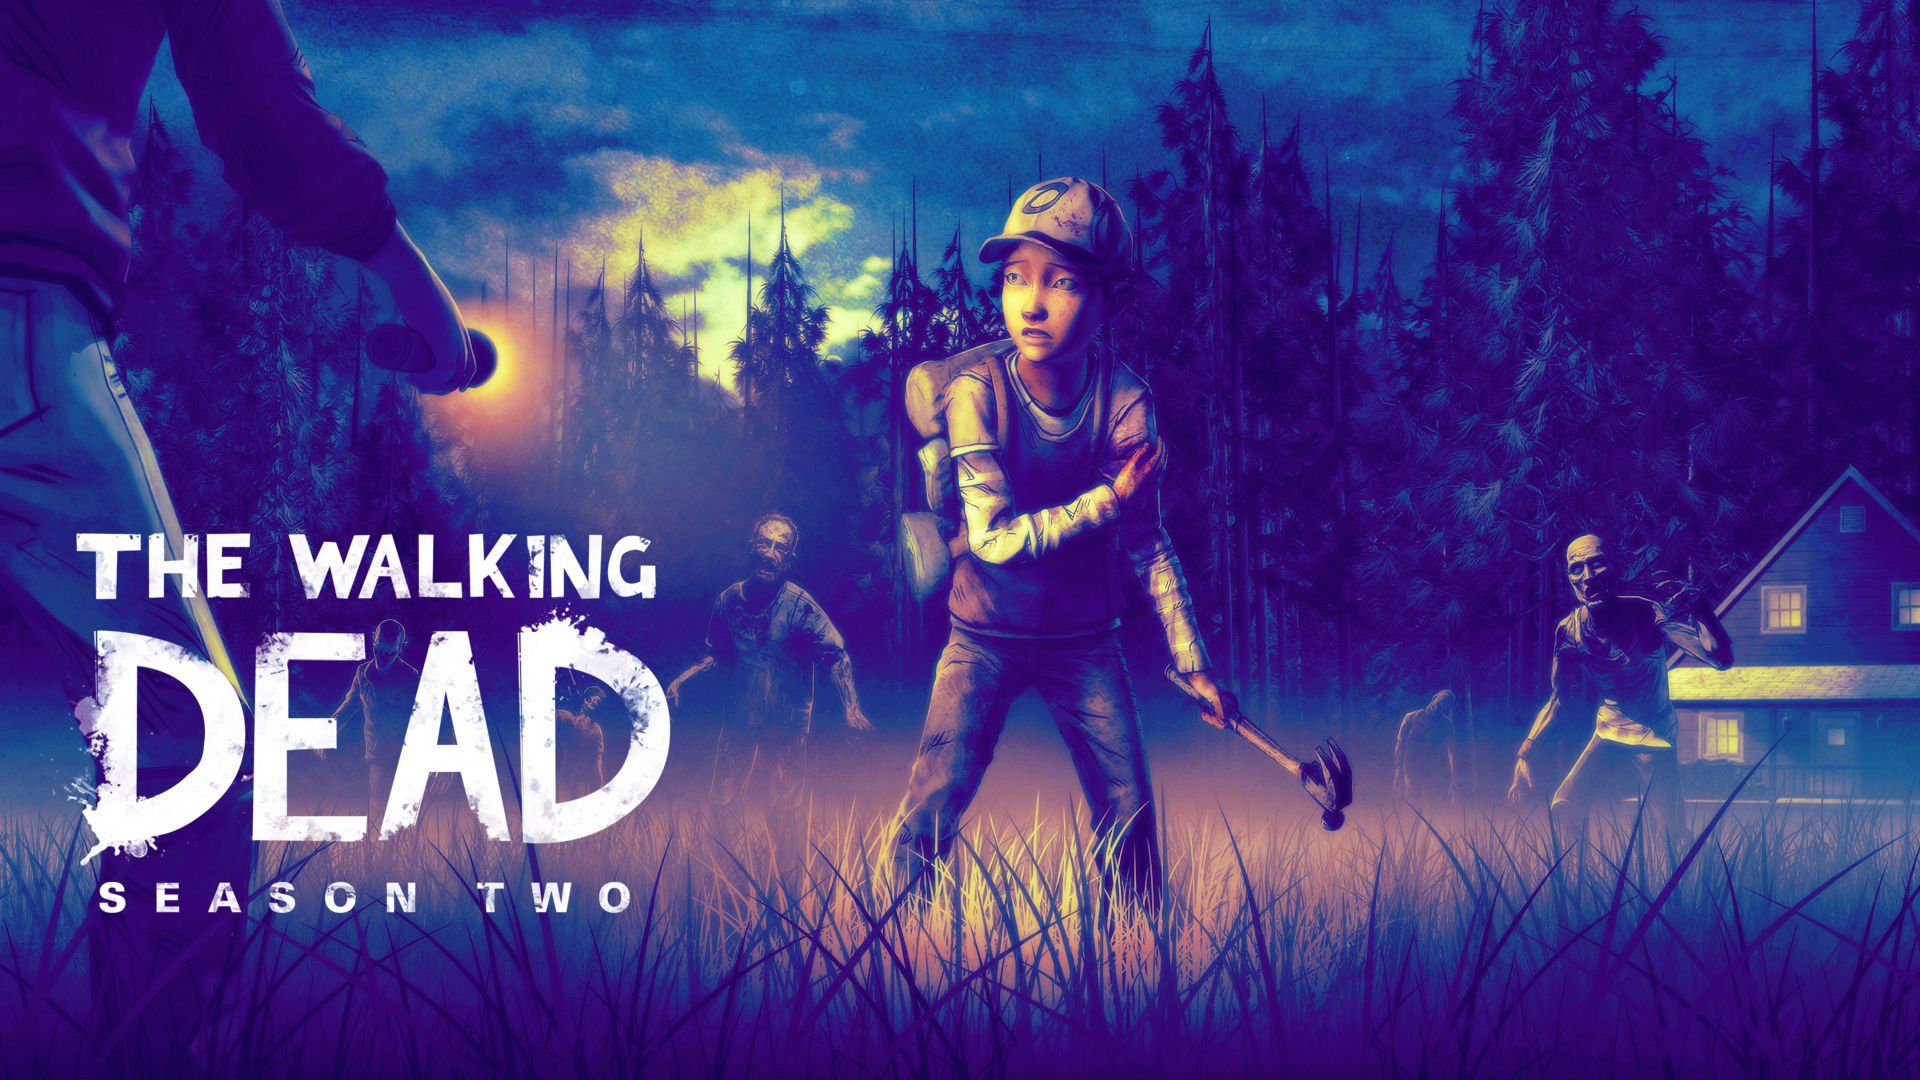 The Walking Dead Game S2 Wallpaper   Clementine by